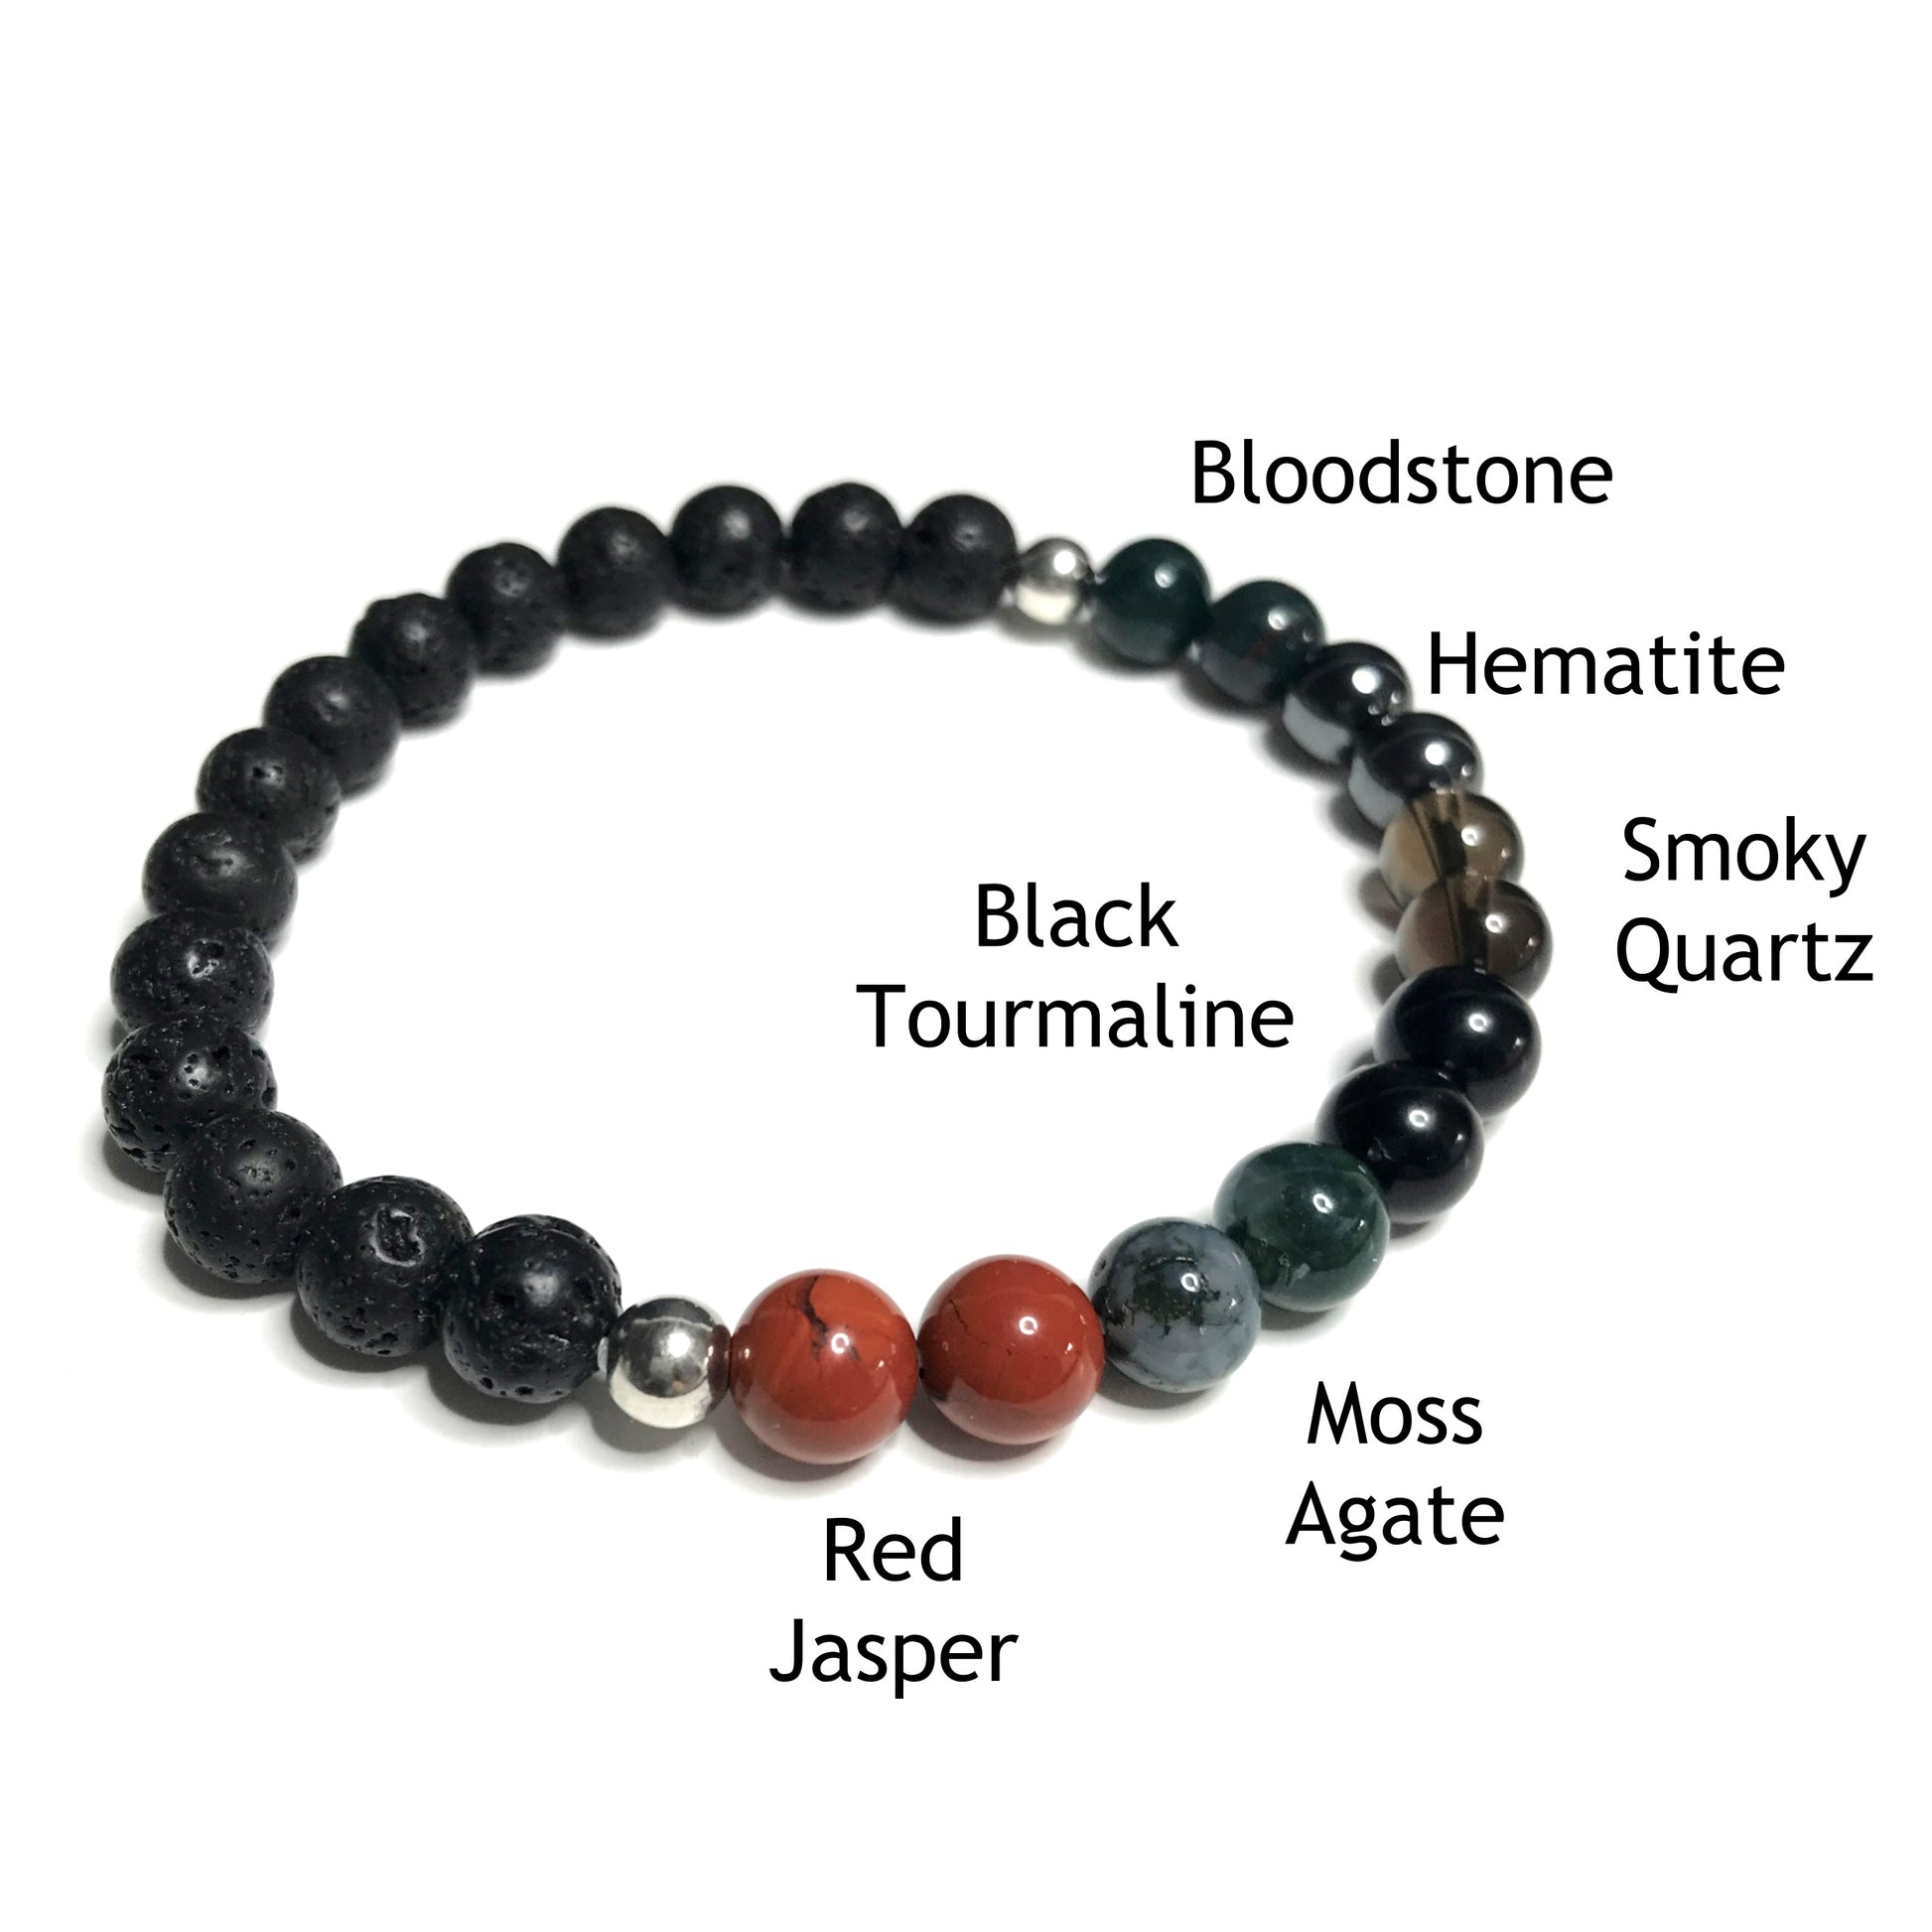 Grounding bracelet with lava rock with the beads labelled as red jasper, moss agate, black tourmaline, smoky quartz, hematite and bloodstone